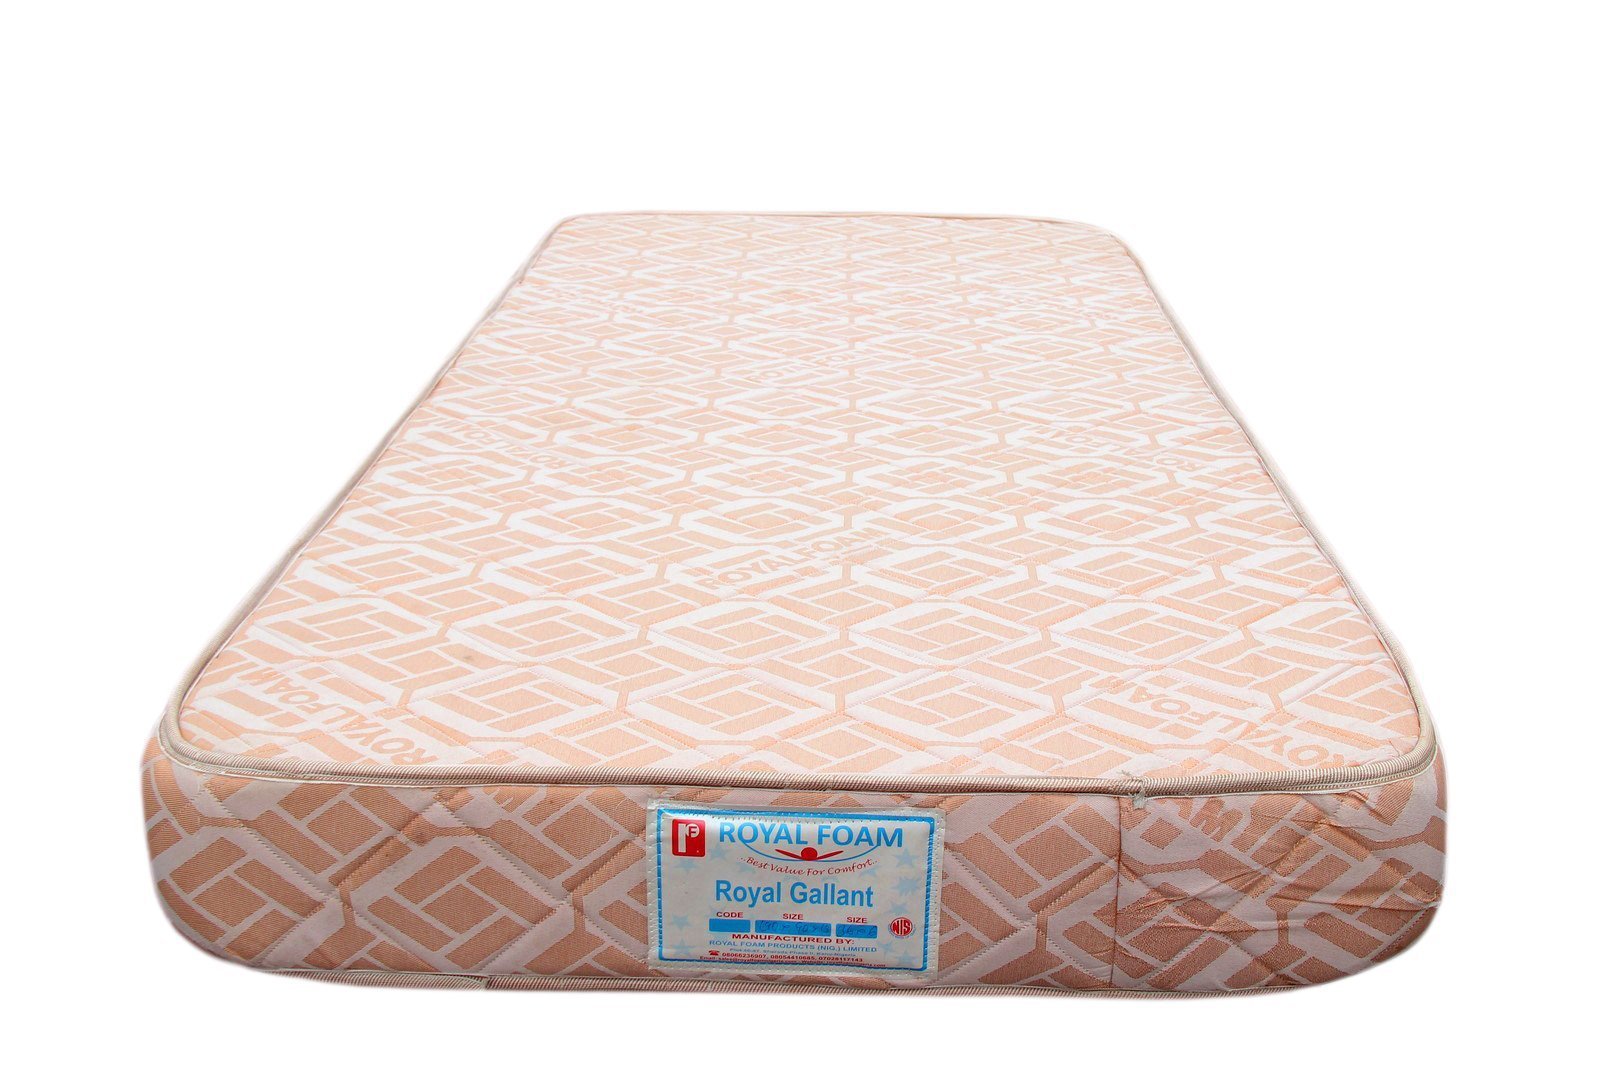 Royal Gallant JACQUARD fabric-Fully Quilted Mattress 190 X 107 X 25 CM(6ft x 3'5ft x 10inches) Single(Lagos Only)